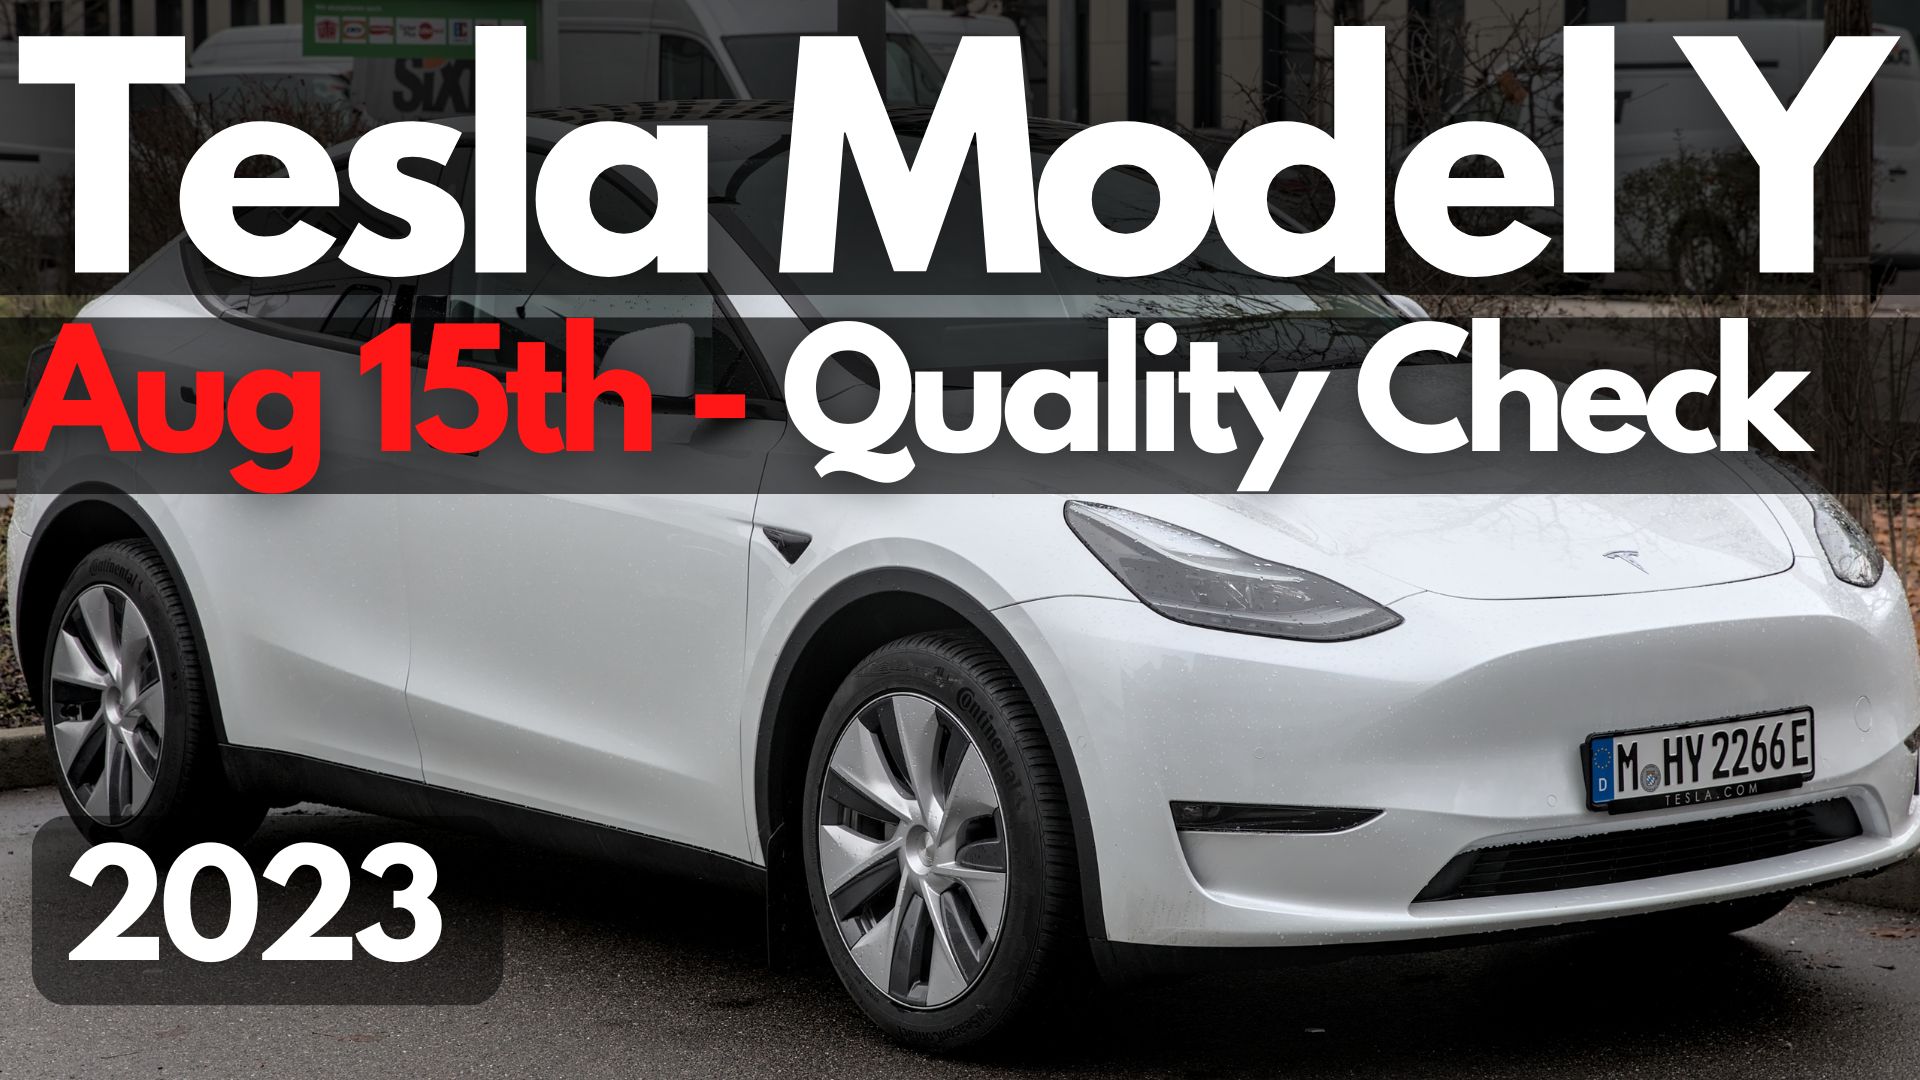 Has Tesla Improved The Model Y Build Quality For Aug 15, 2023?